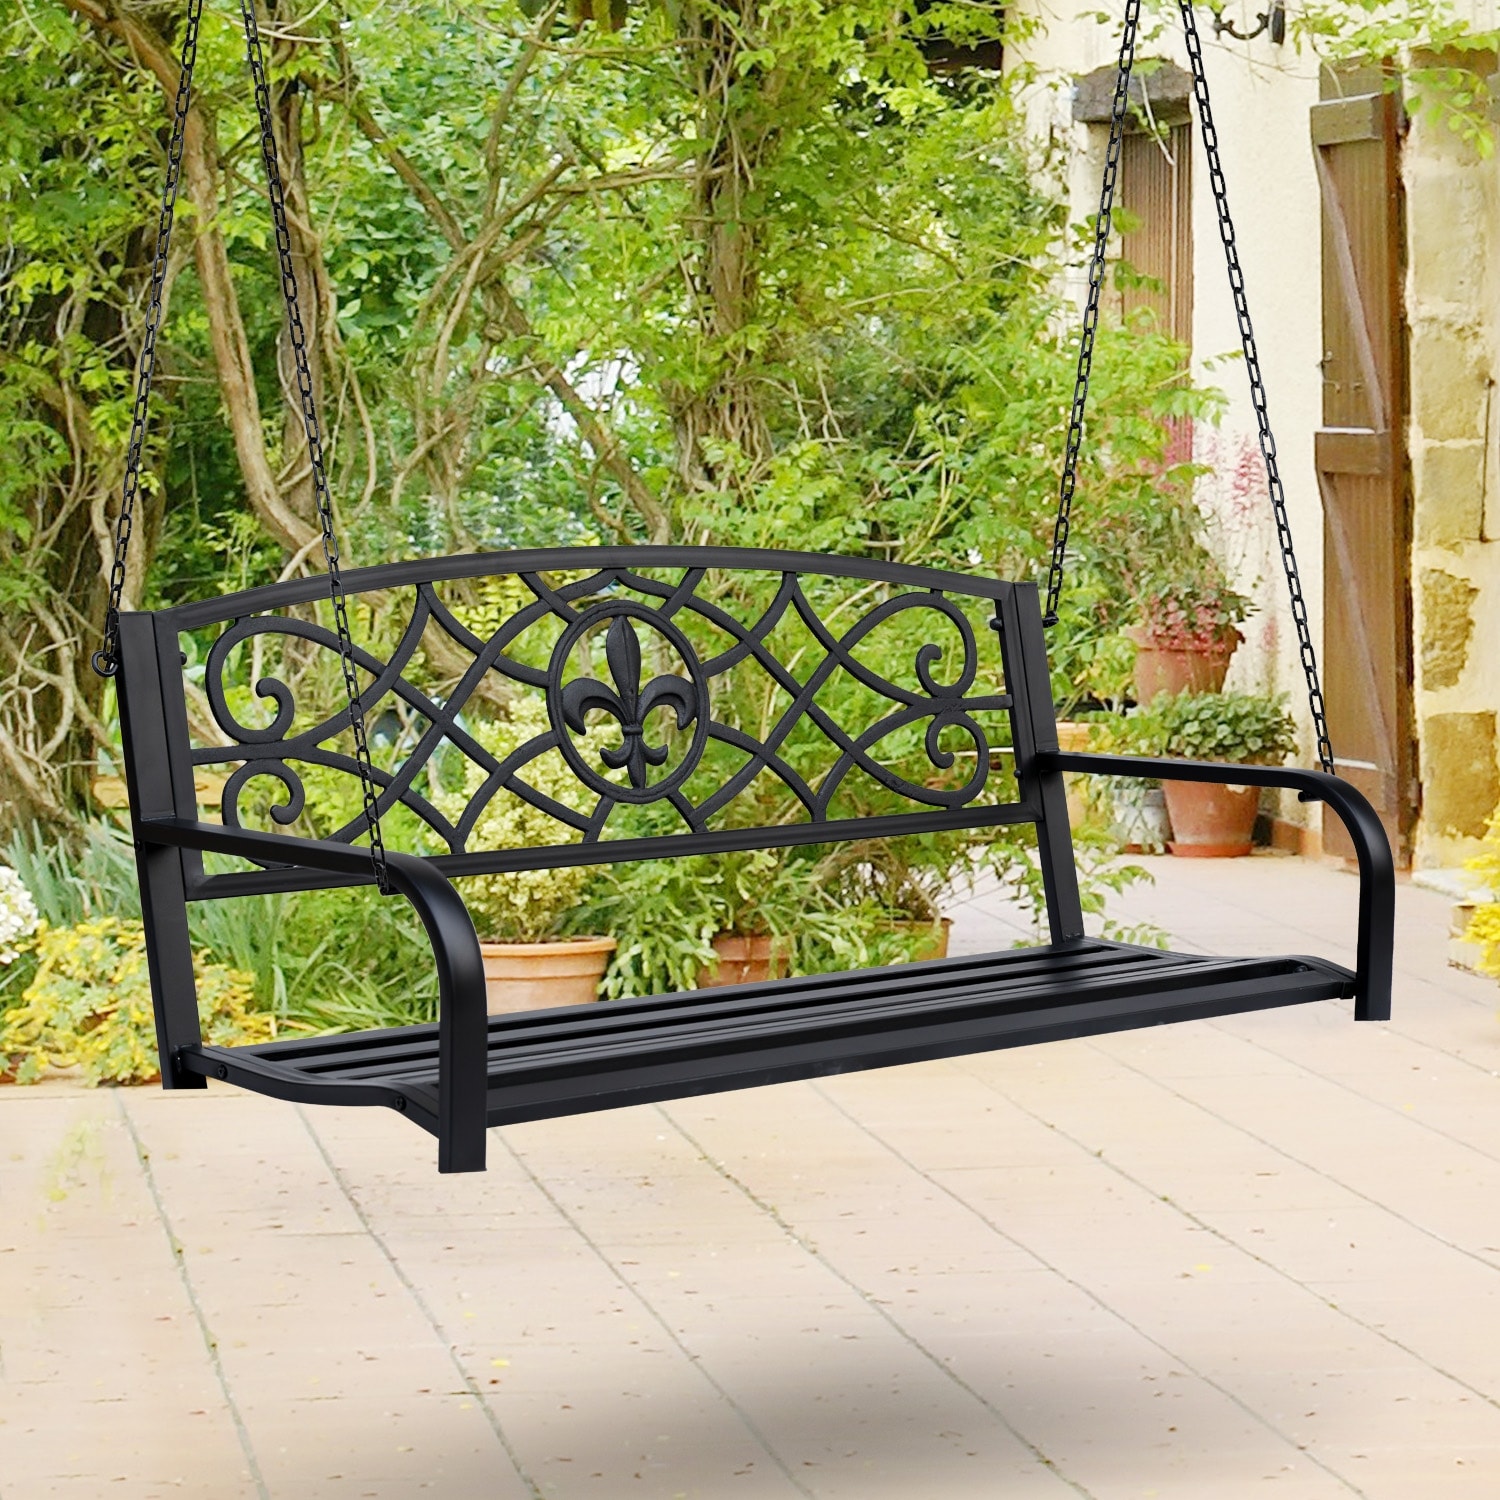 Outsunny  Steel Fleur-de-Lis Design Outdoor Porch Swing Seat Bench with Chains for the Yard, Deck, and Backyard, Bronze